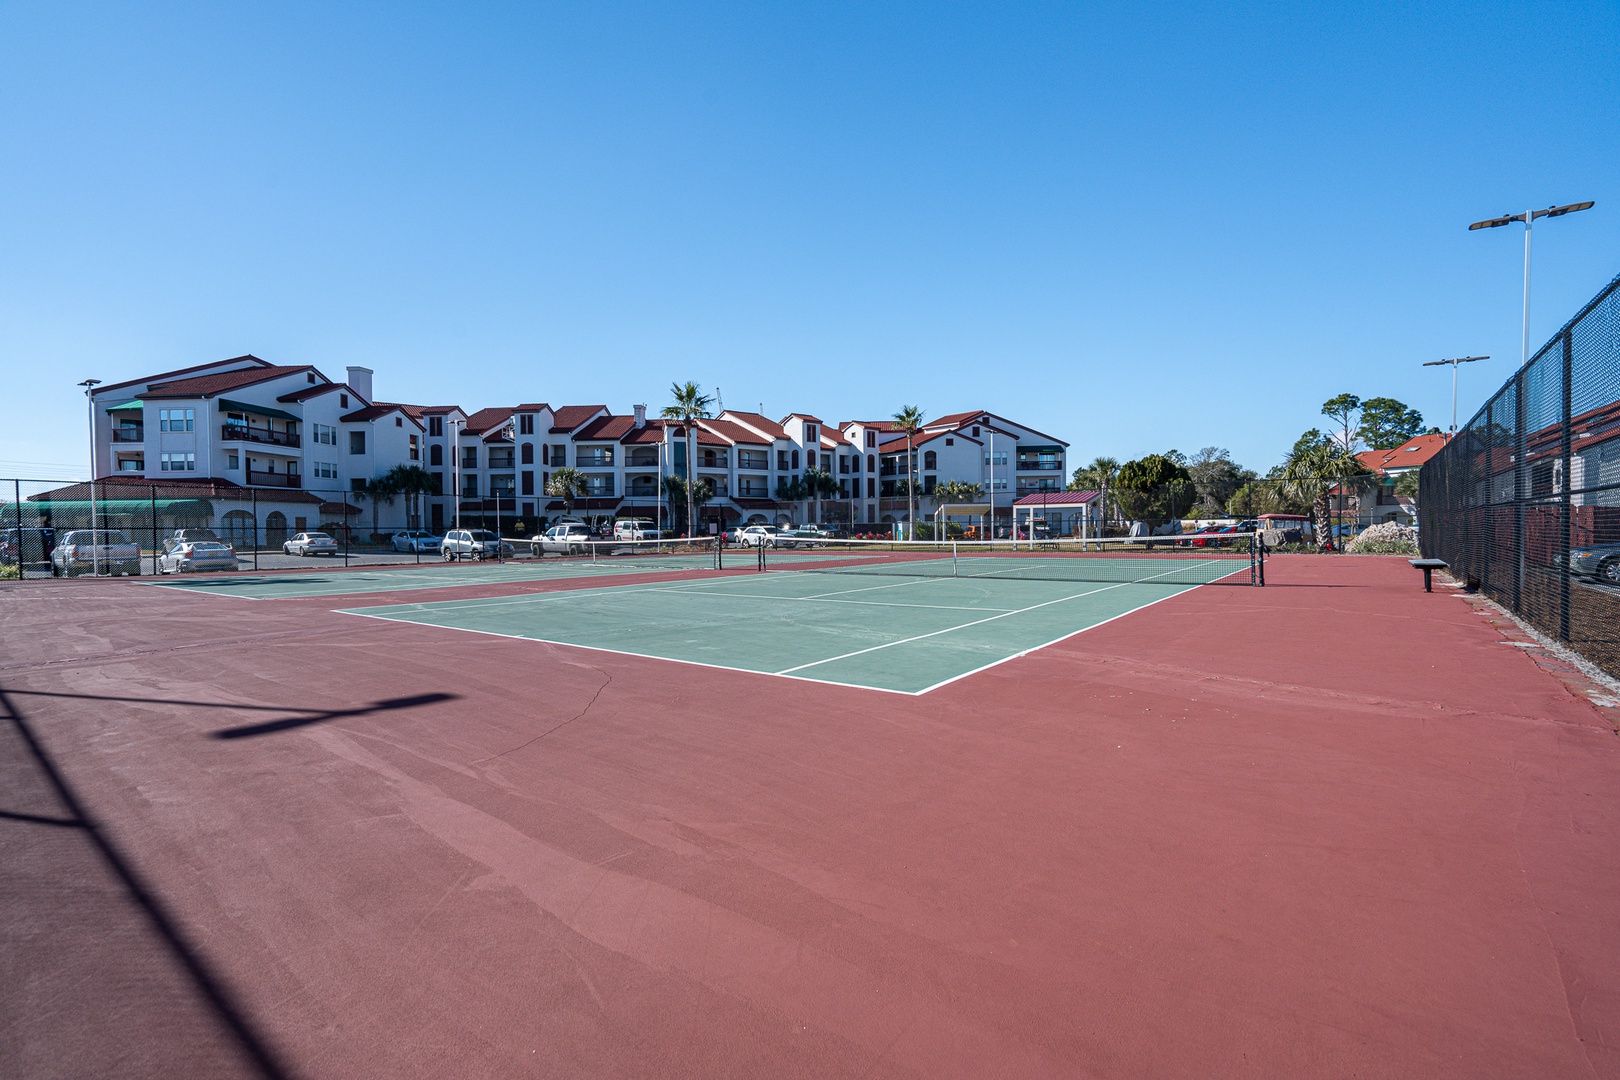 Enjoy all the fabulous amenities this community has to offer!